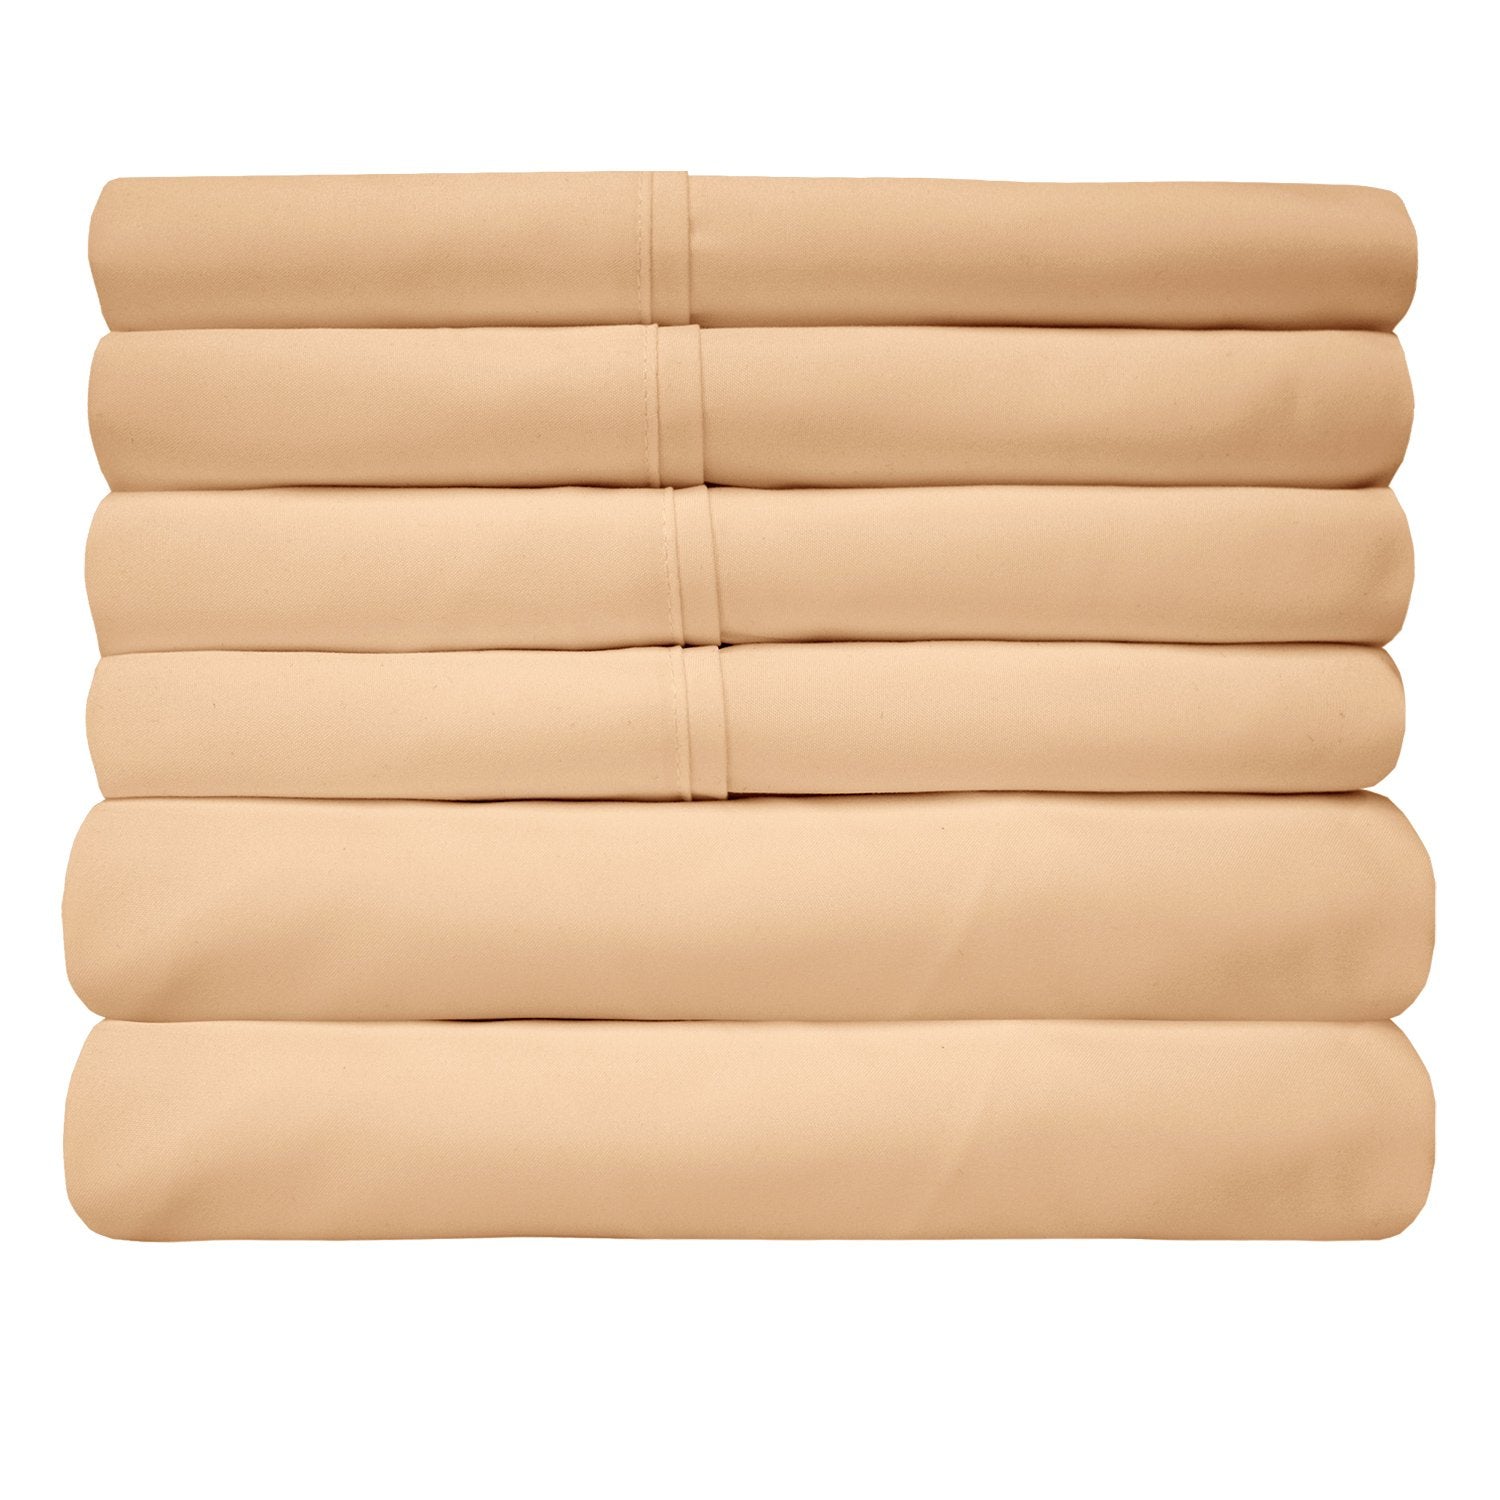 Deluxe 6-Piece Bed Sheet Set (Camel) - Folded 2